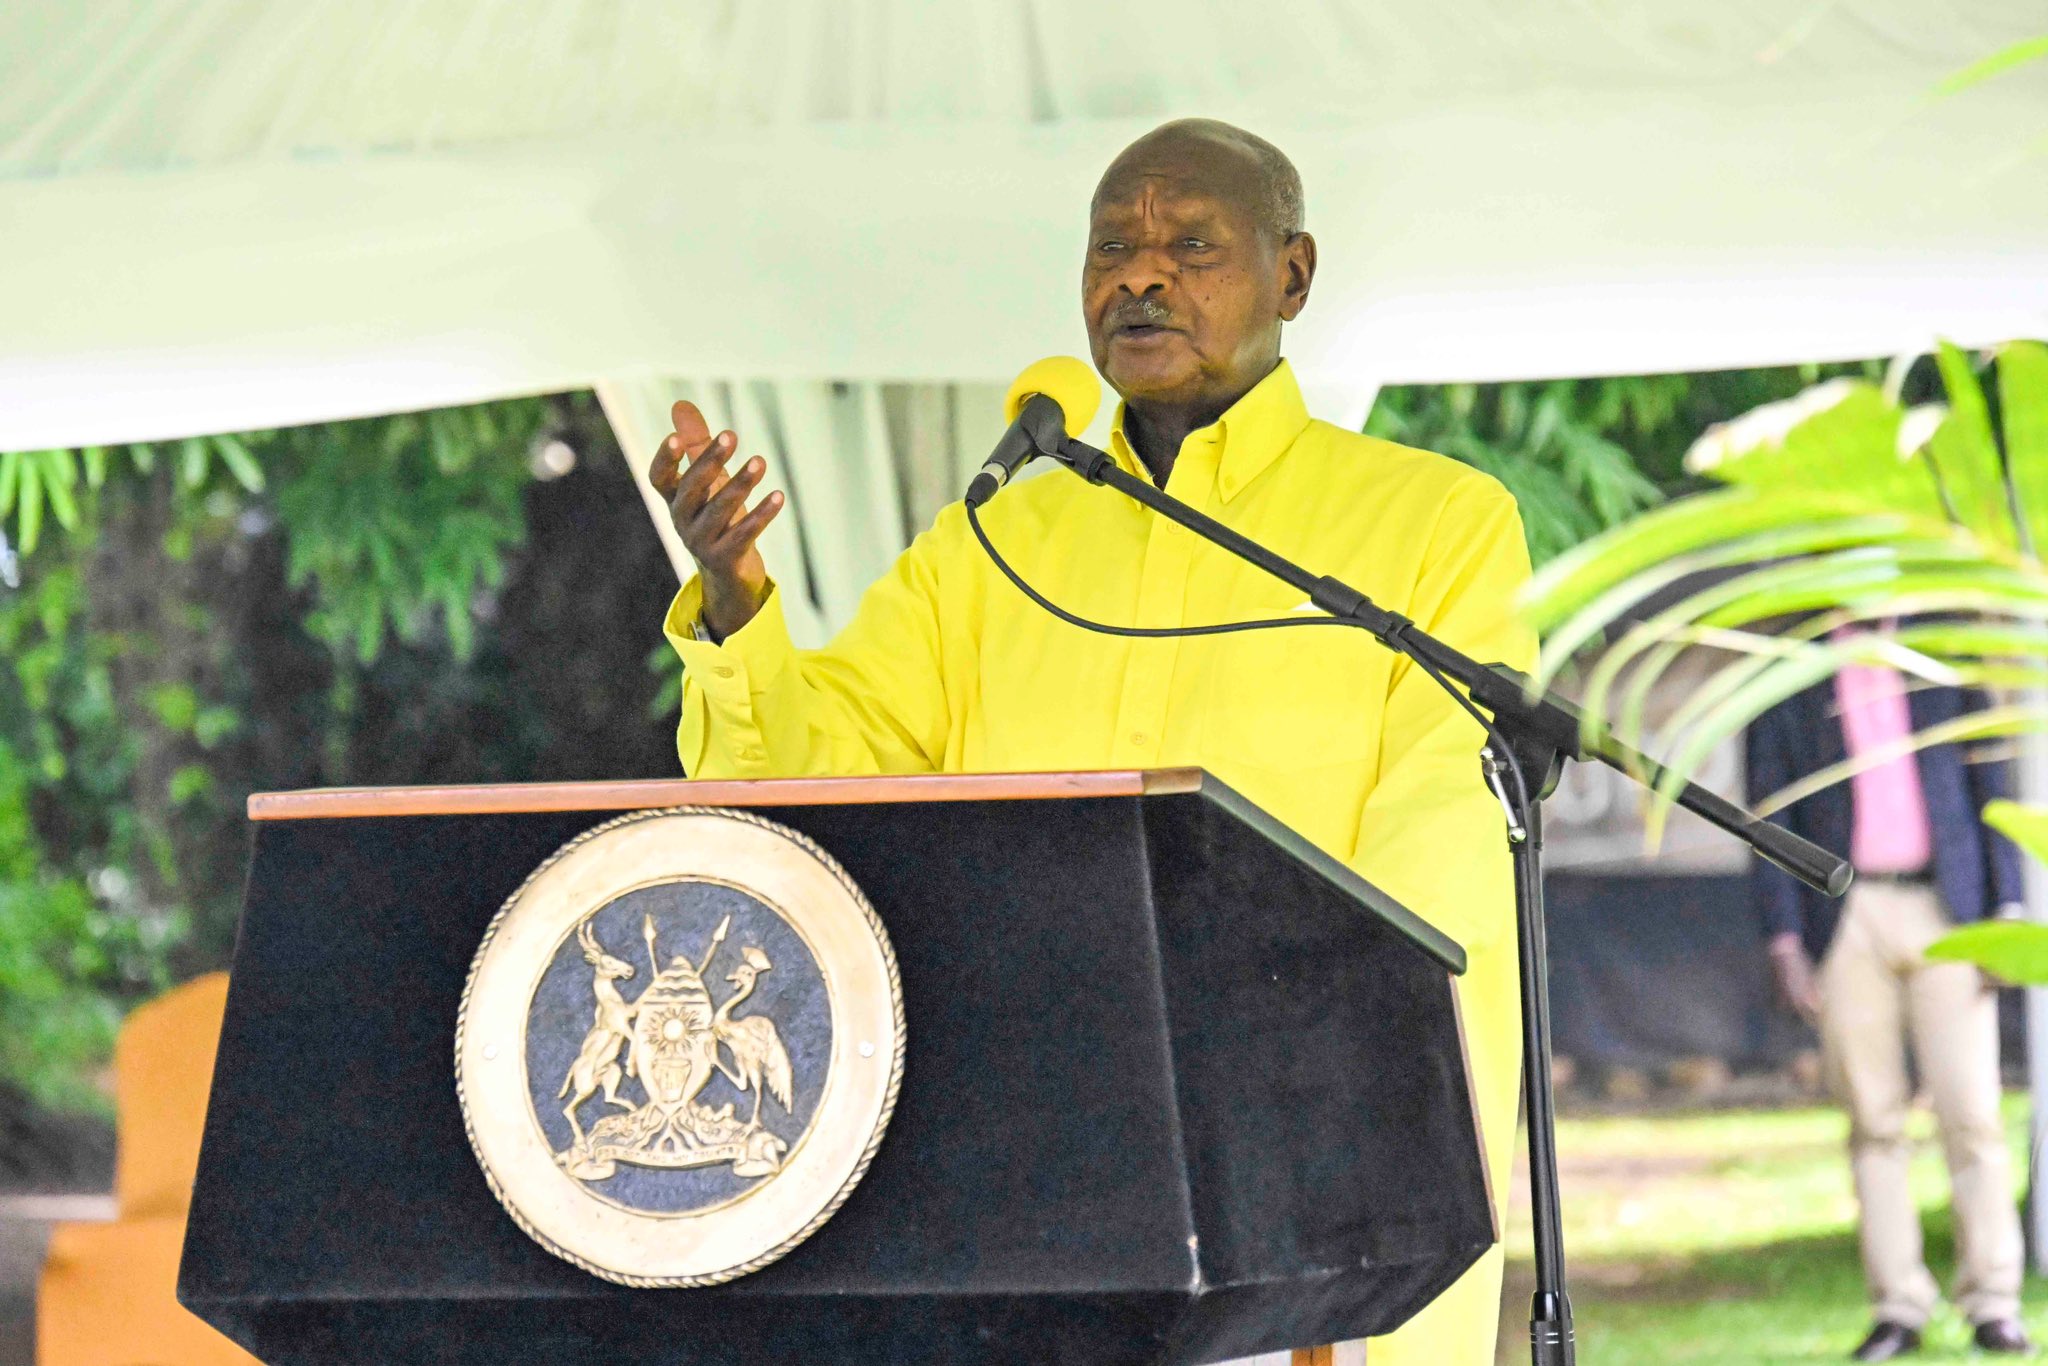 A moneylender charging an interest of 20% per month? Enough is enough, says Museveni